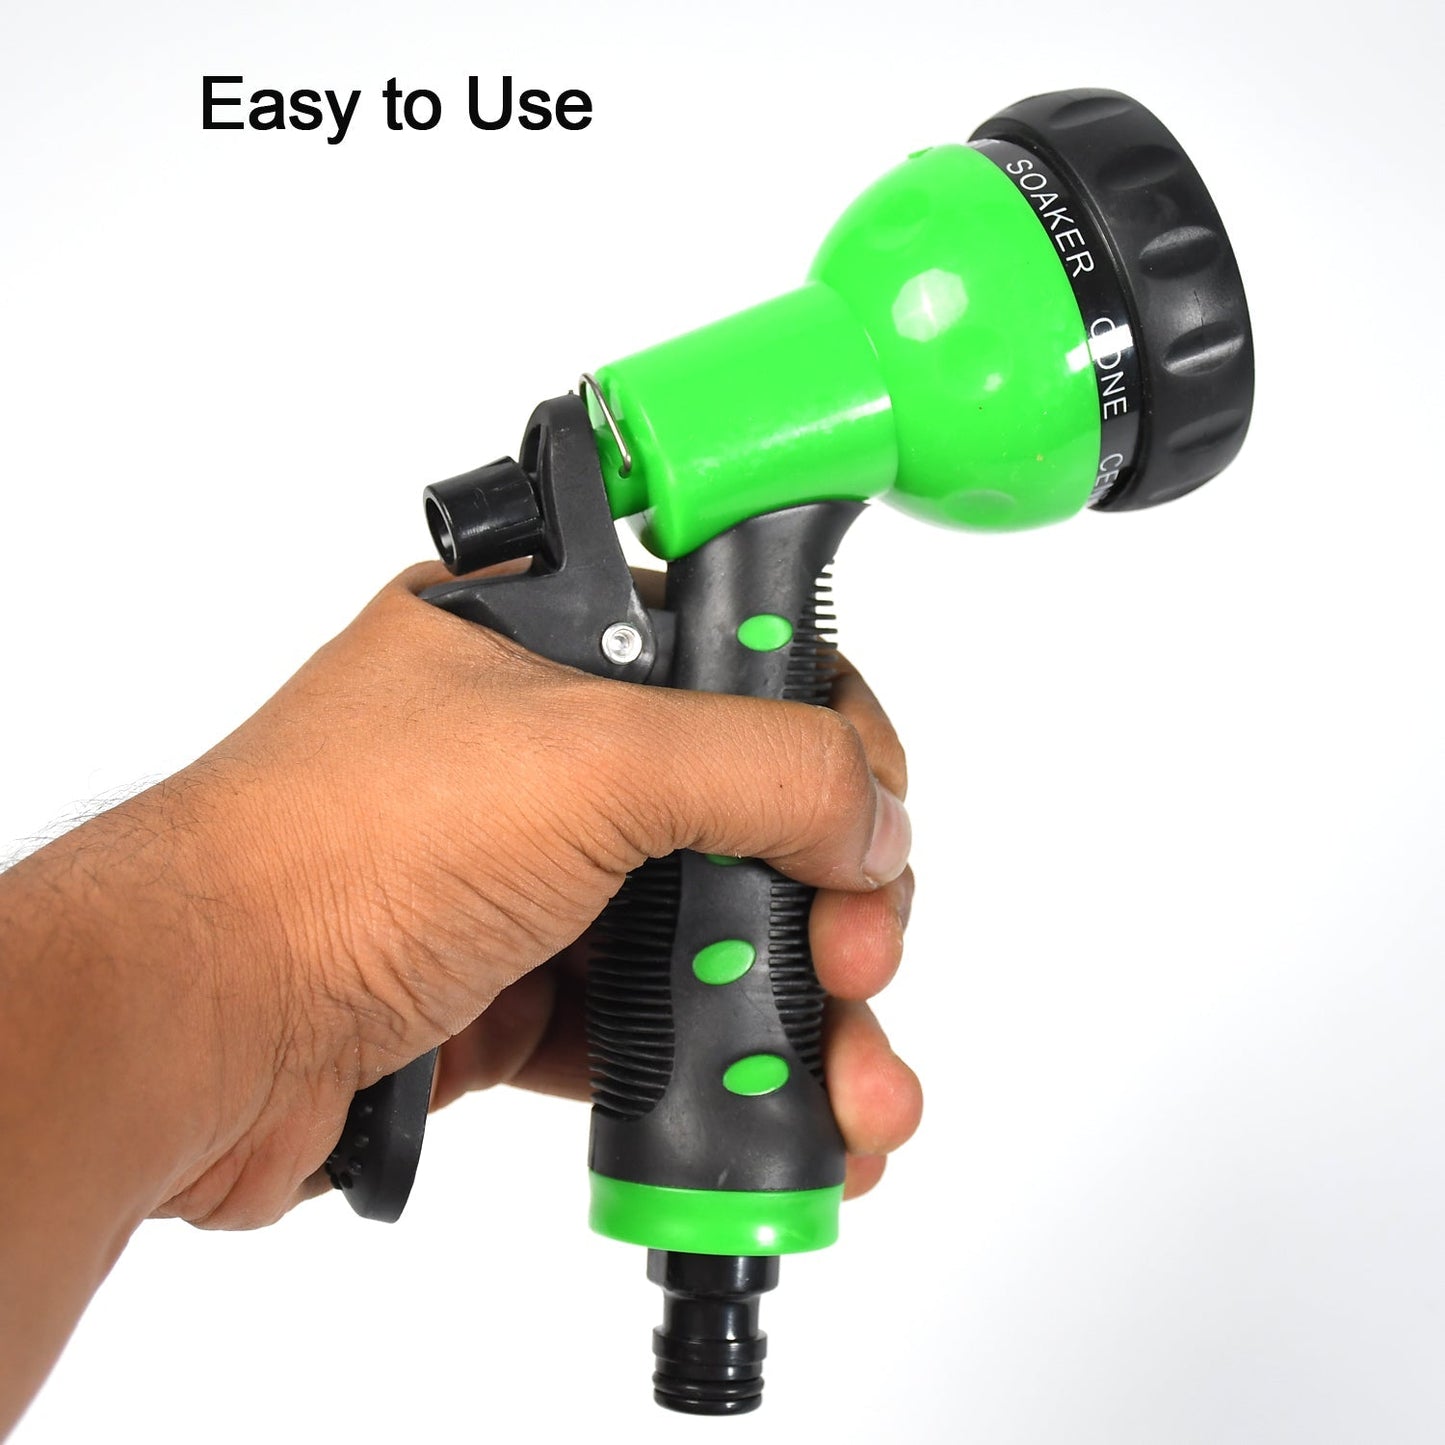 Hose Nozzle Garden Hose Nozzle Hose Spray Nozzle with 8 Adjustable Patterns Front Trigger Hose Sprayer Heavy Duty Metal Water Hose Nozzle for Cleaning, Watering, Washing, Bathing